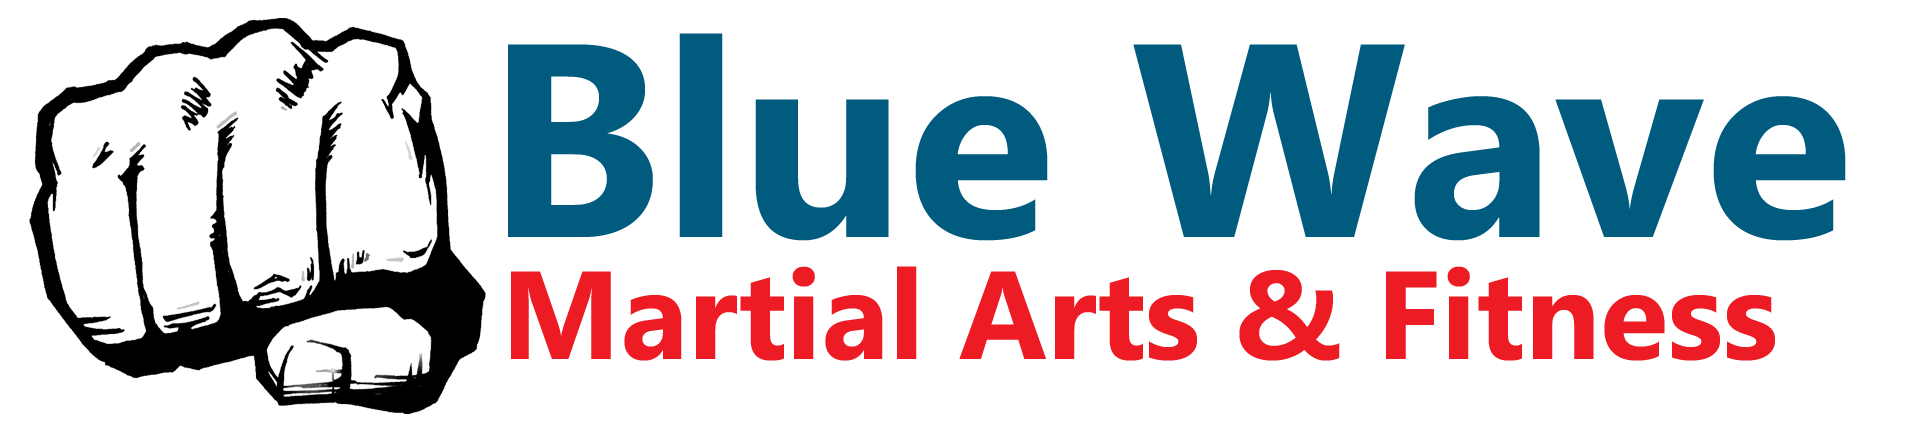 Blue Wave Martial Arts & Fitness